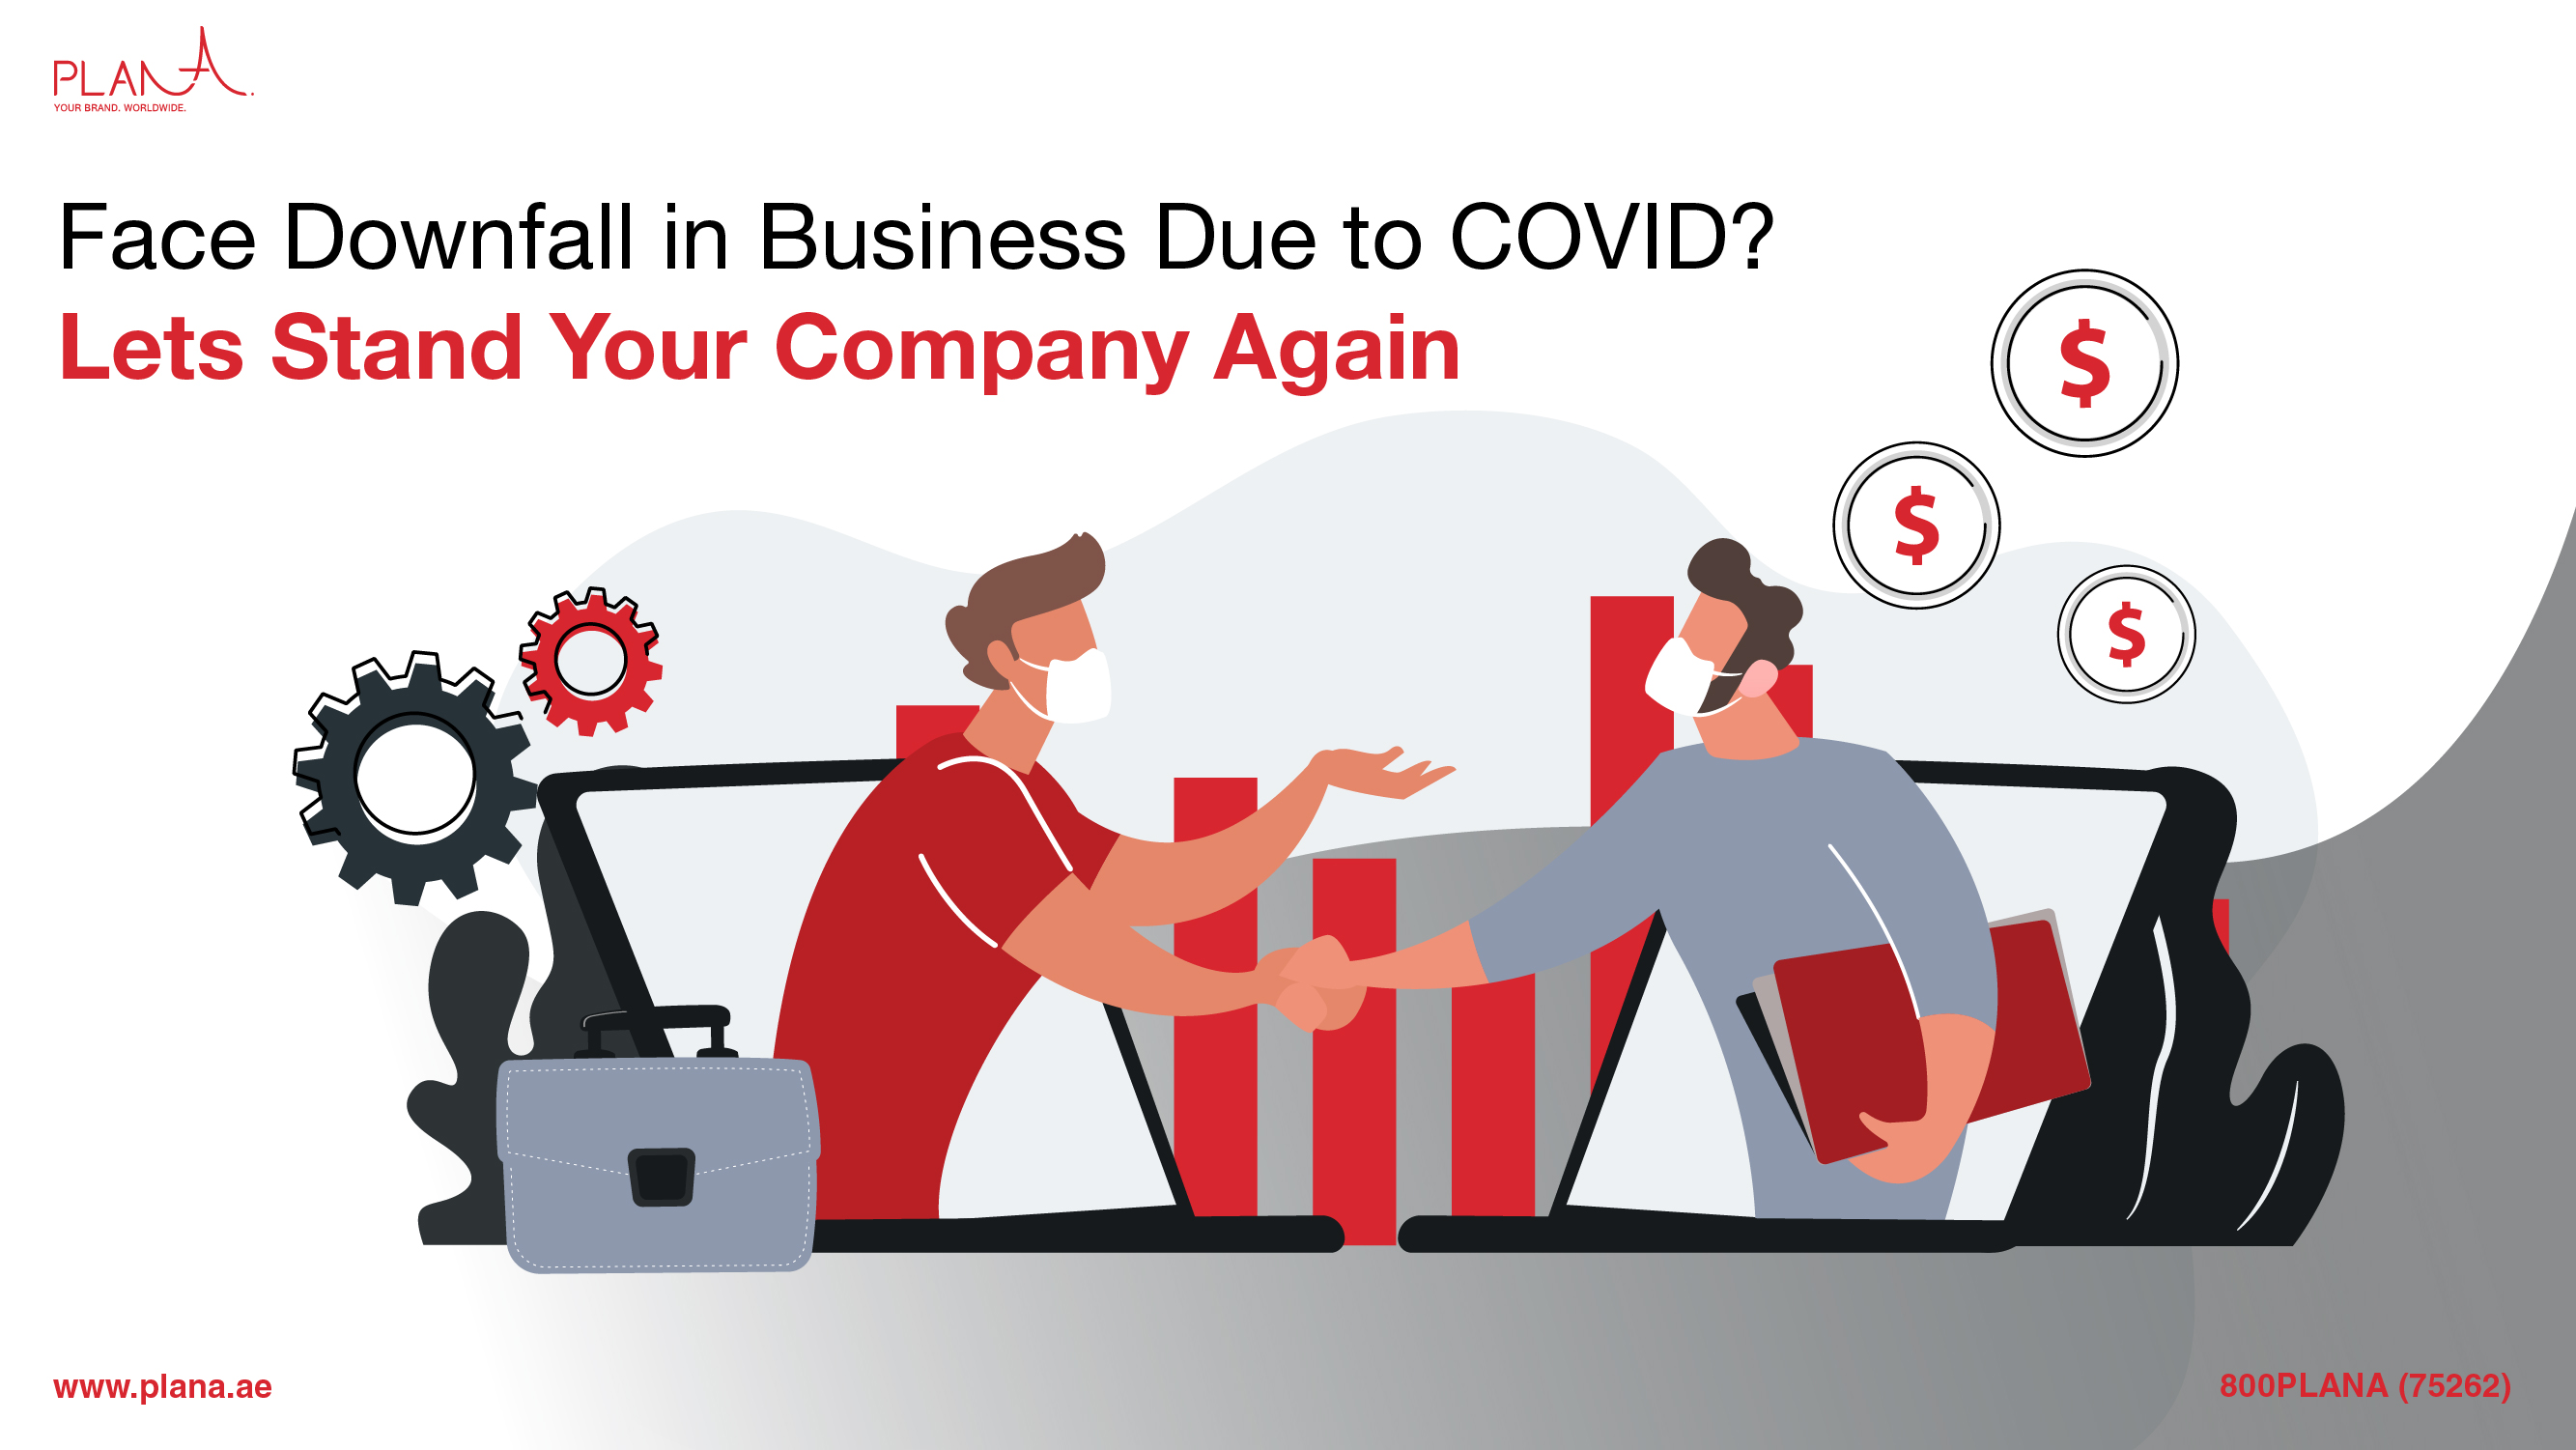 Face Downfall in Business Due to COVID? Let’s Stand Your Company Again